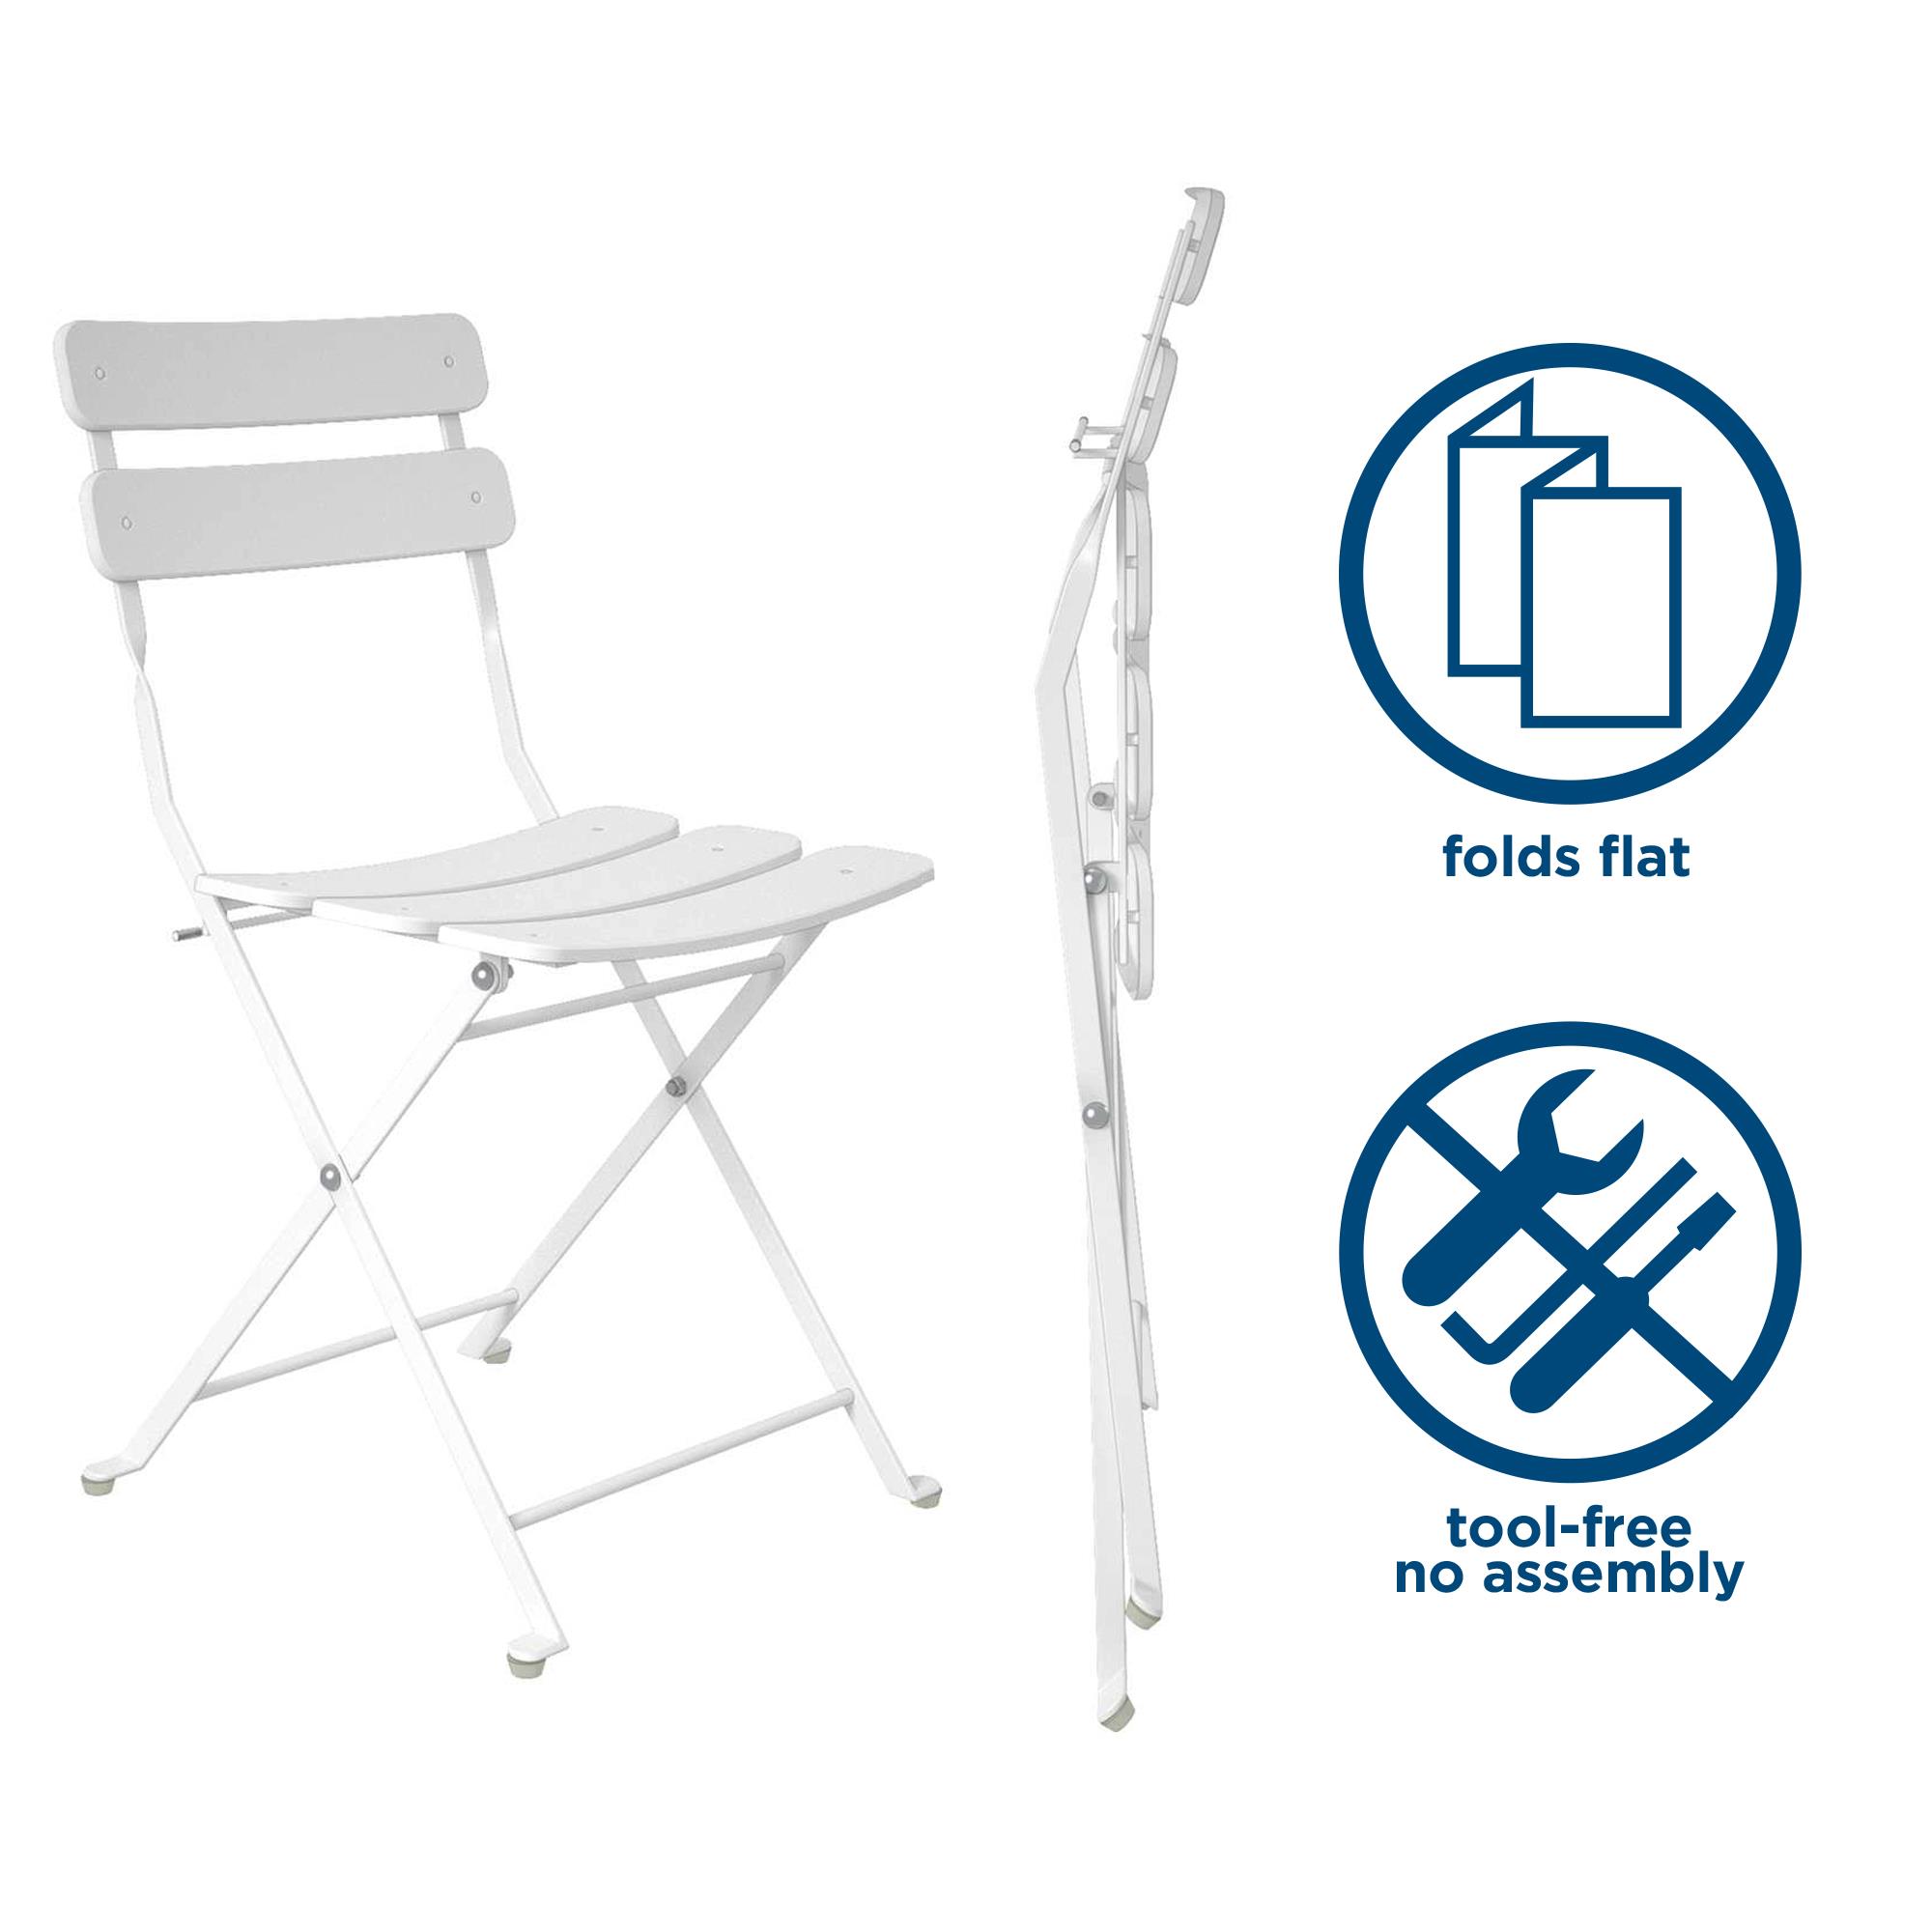 COSCO Outdoor Living, 3 Piece Bistro Set with 2 Folding Chairs, White - image 5 of 7